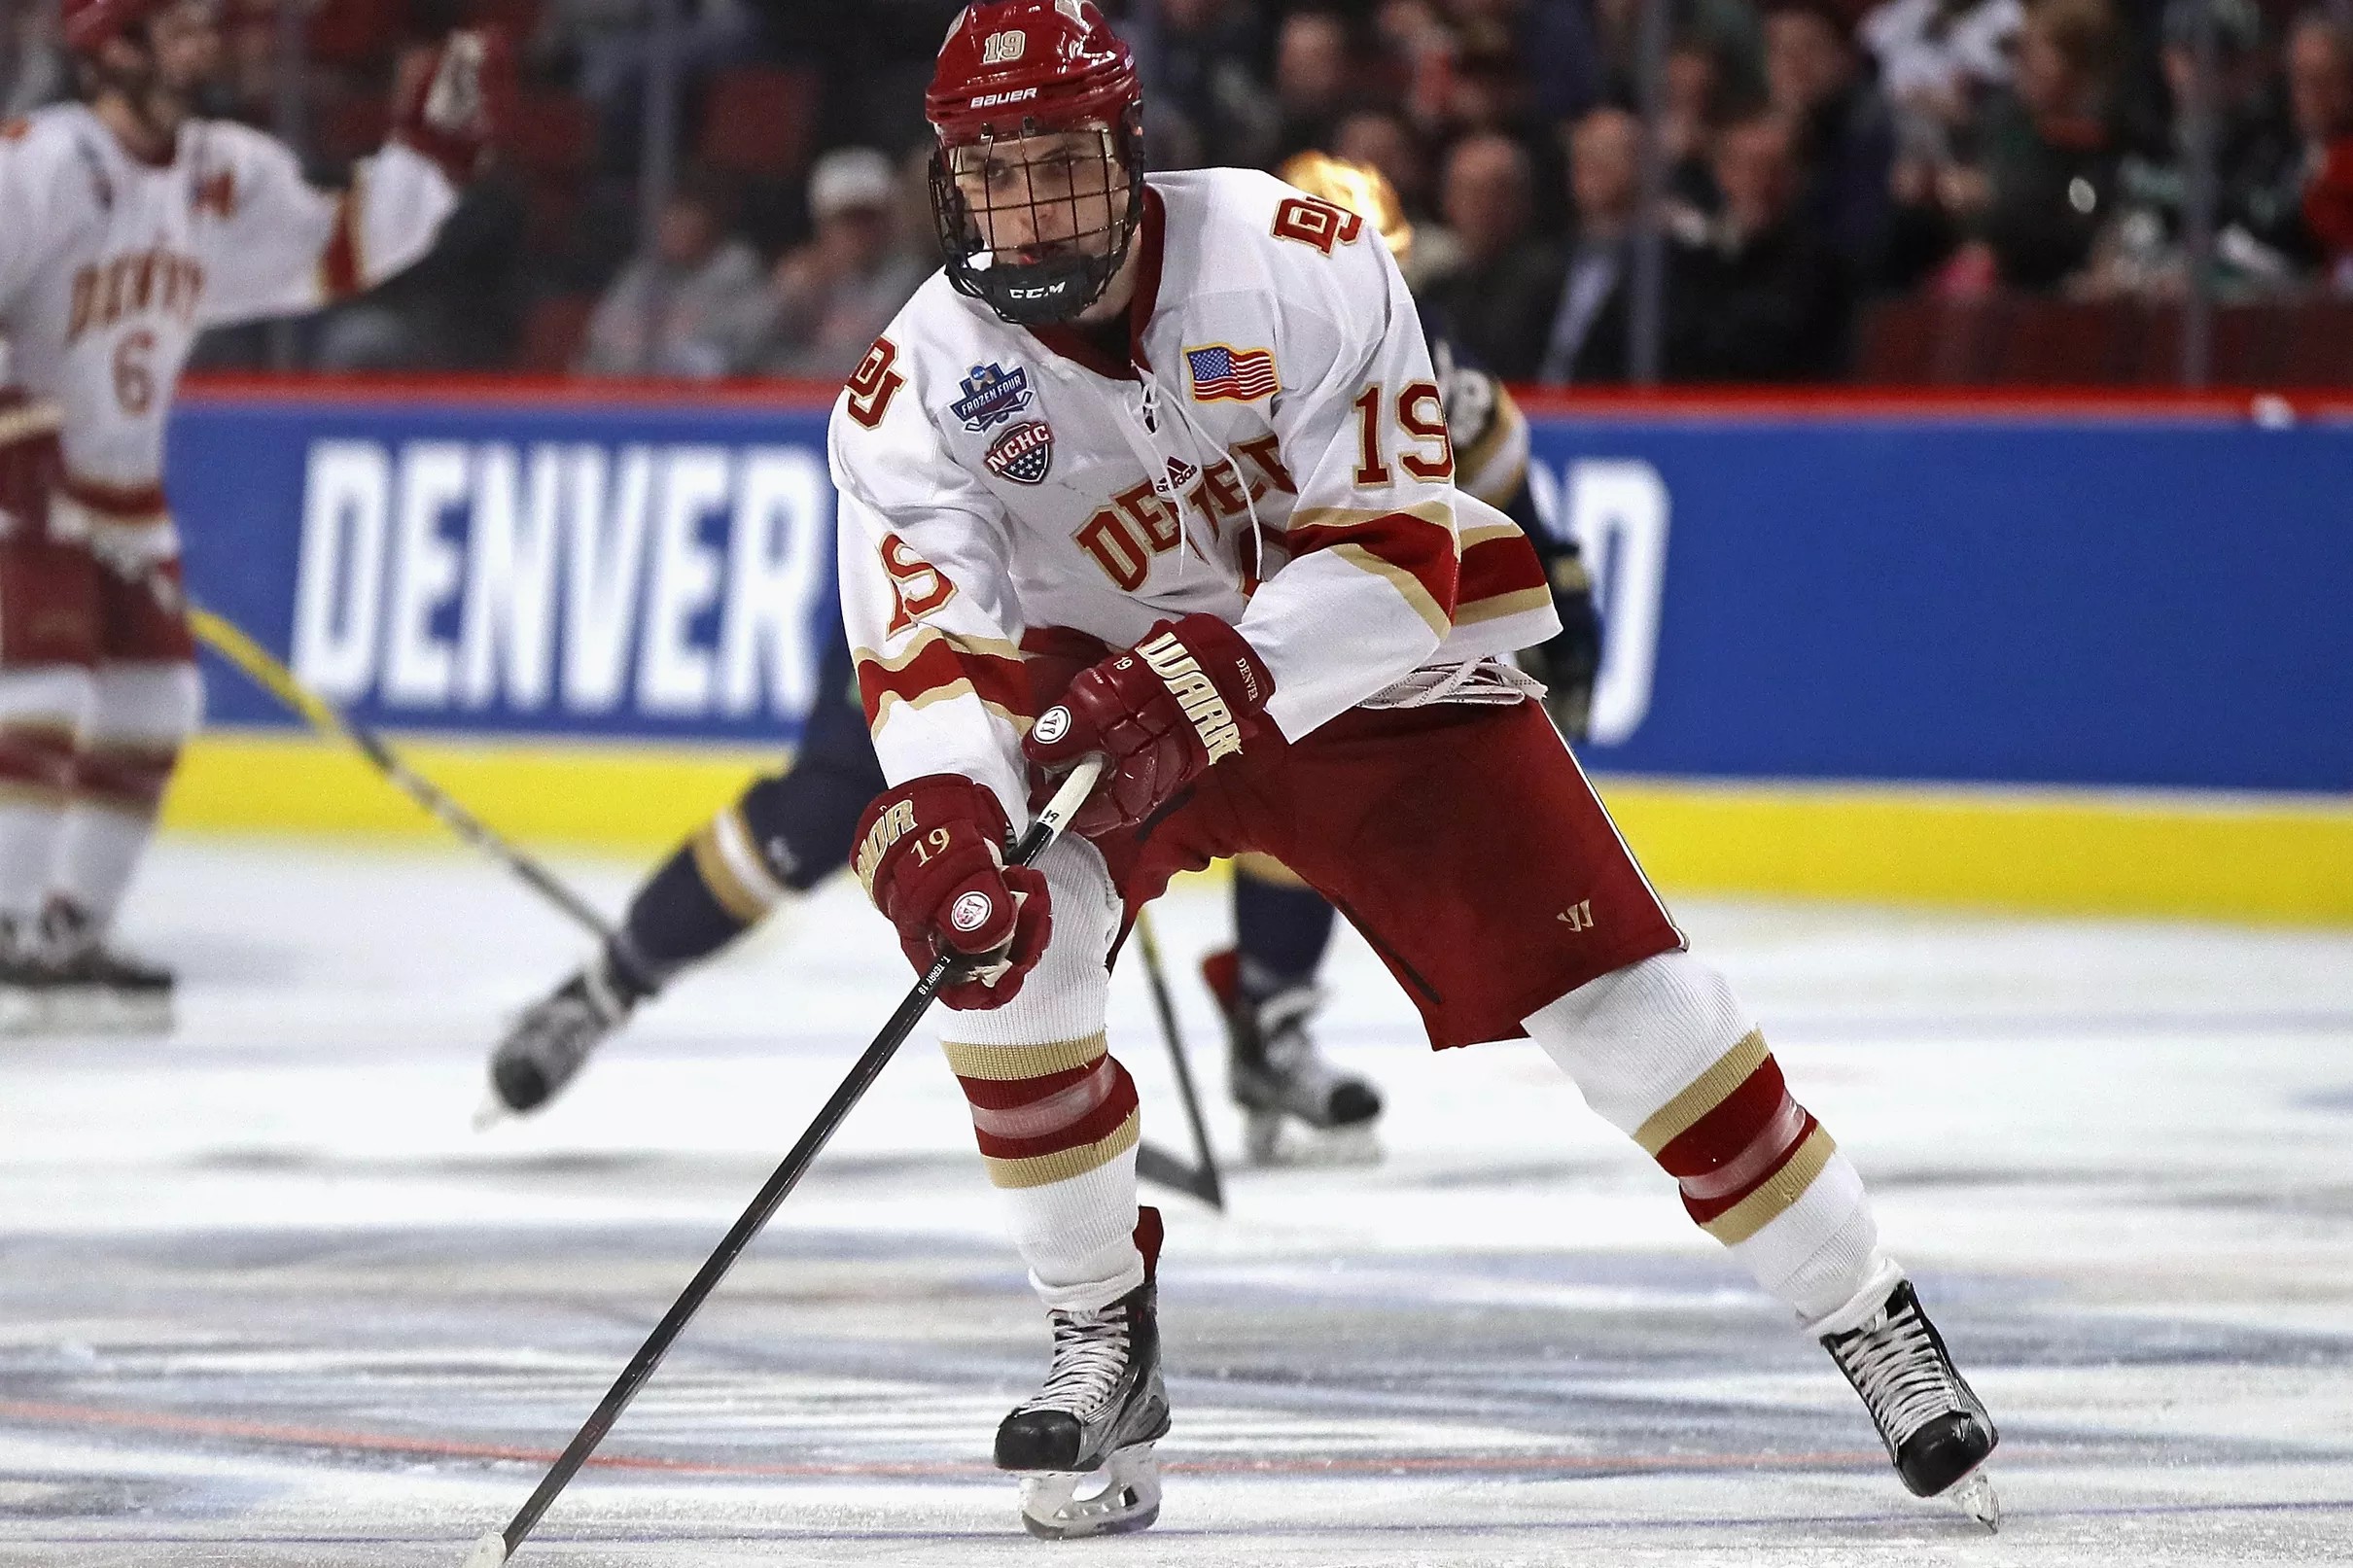 NCAA Playoff Preview: A battle for Colorado hockey supremacy